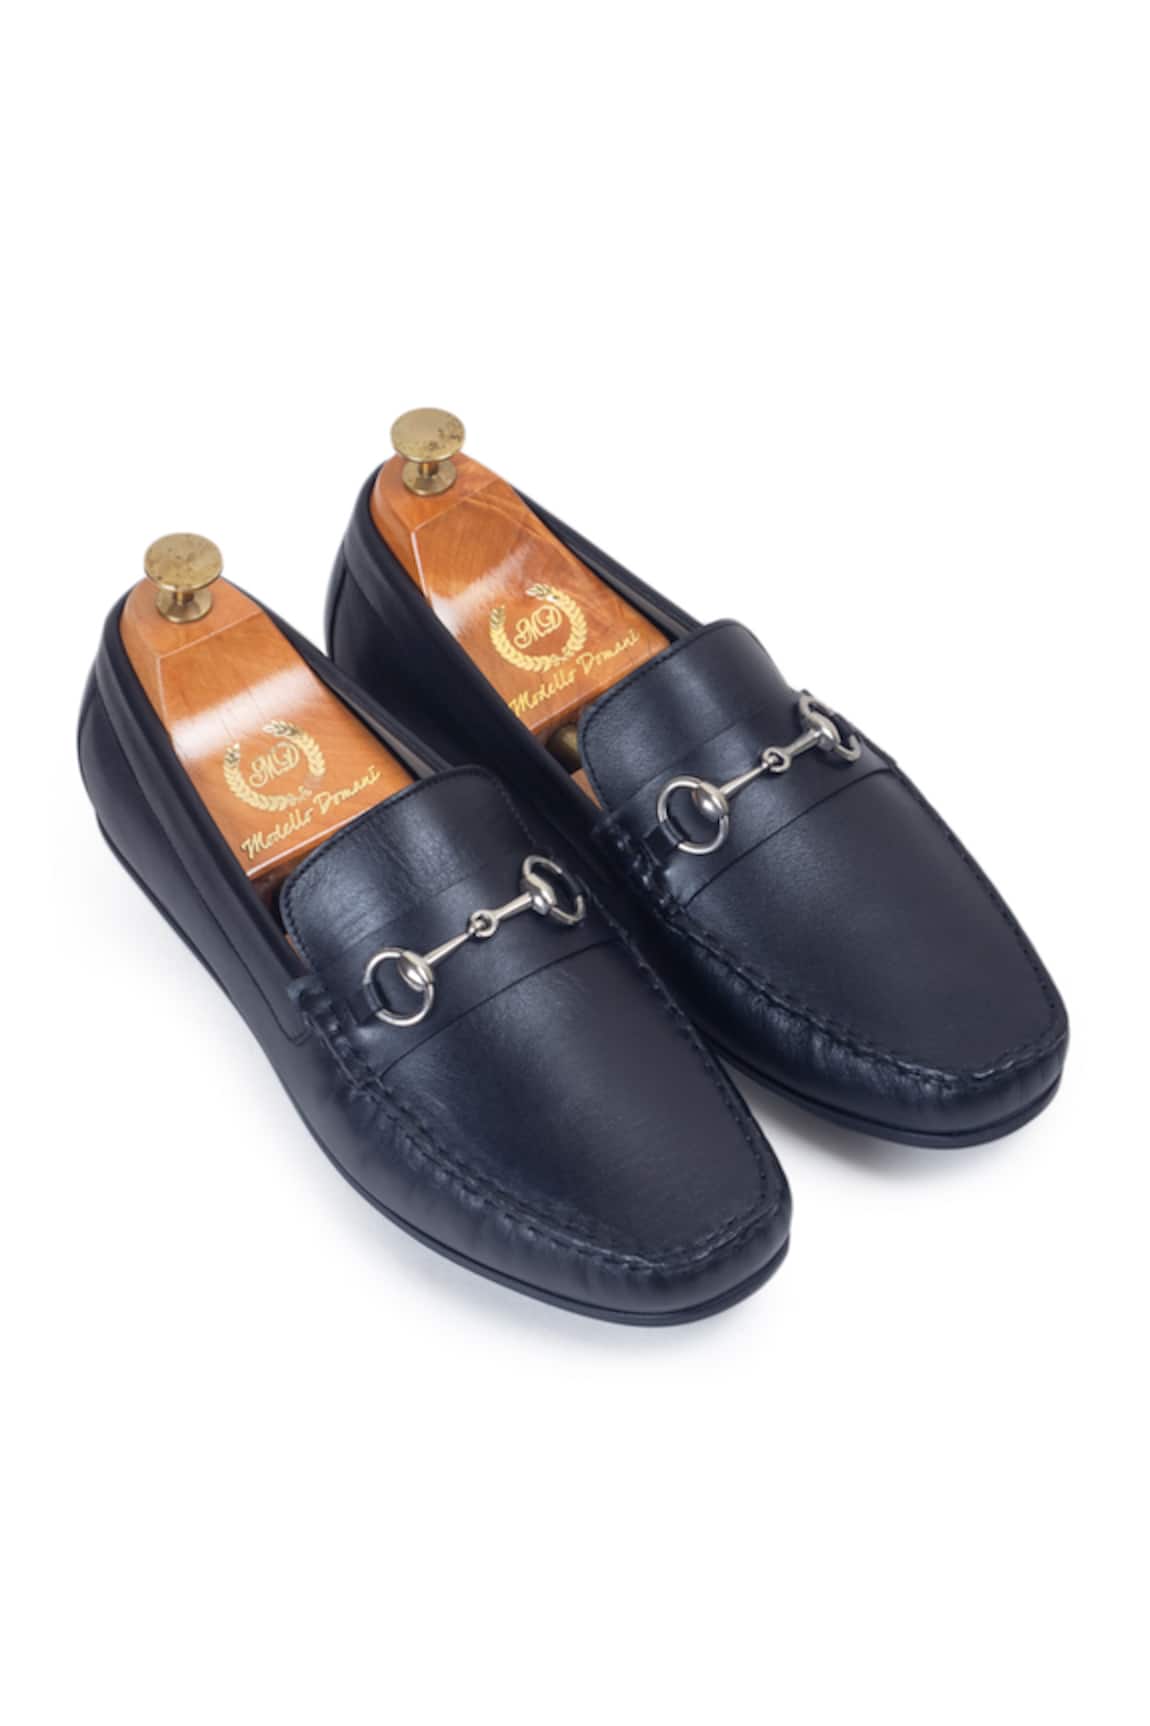 Domani Tuscany Leather Loafers